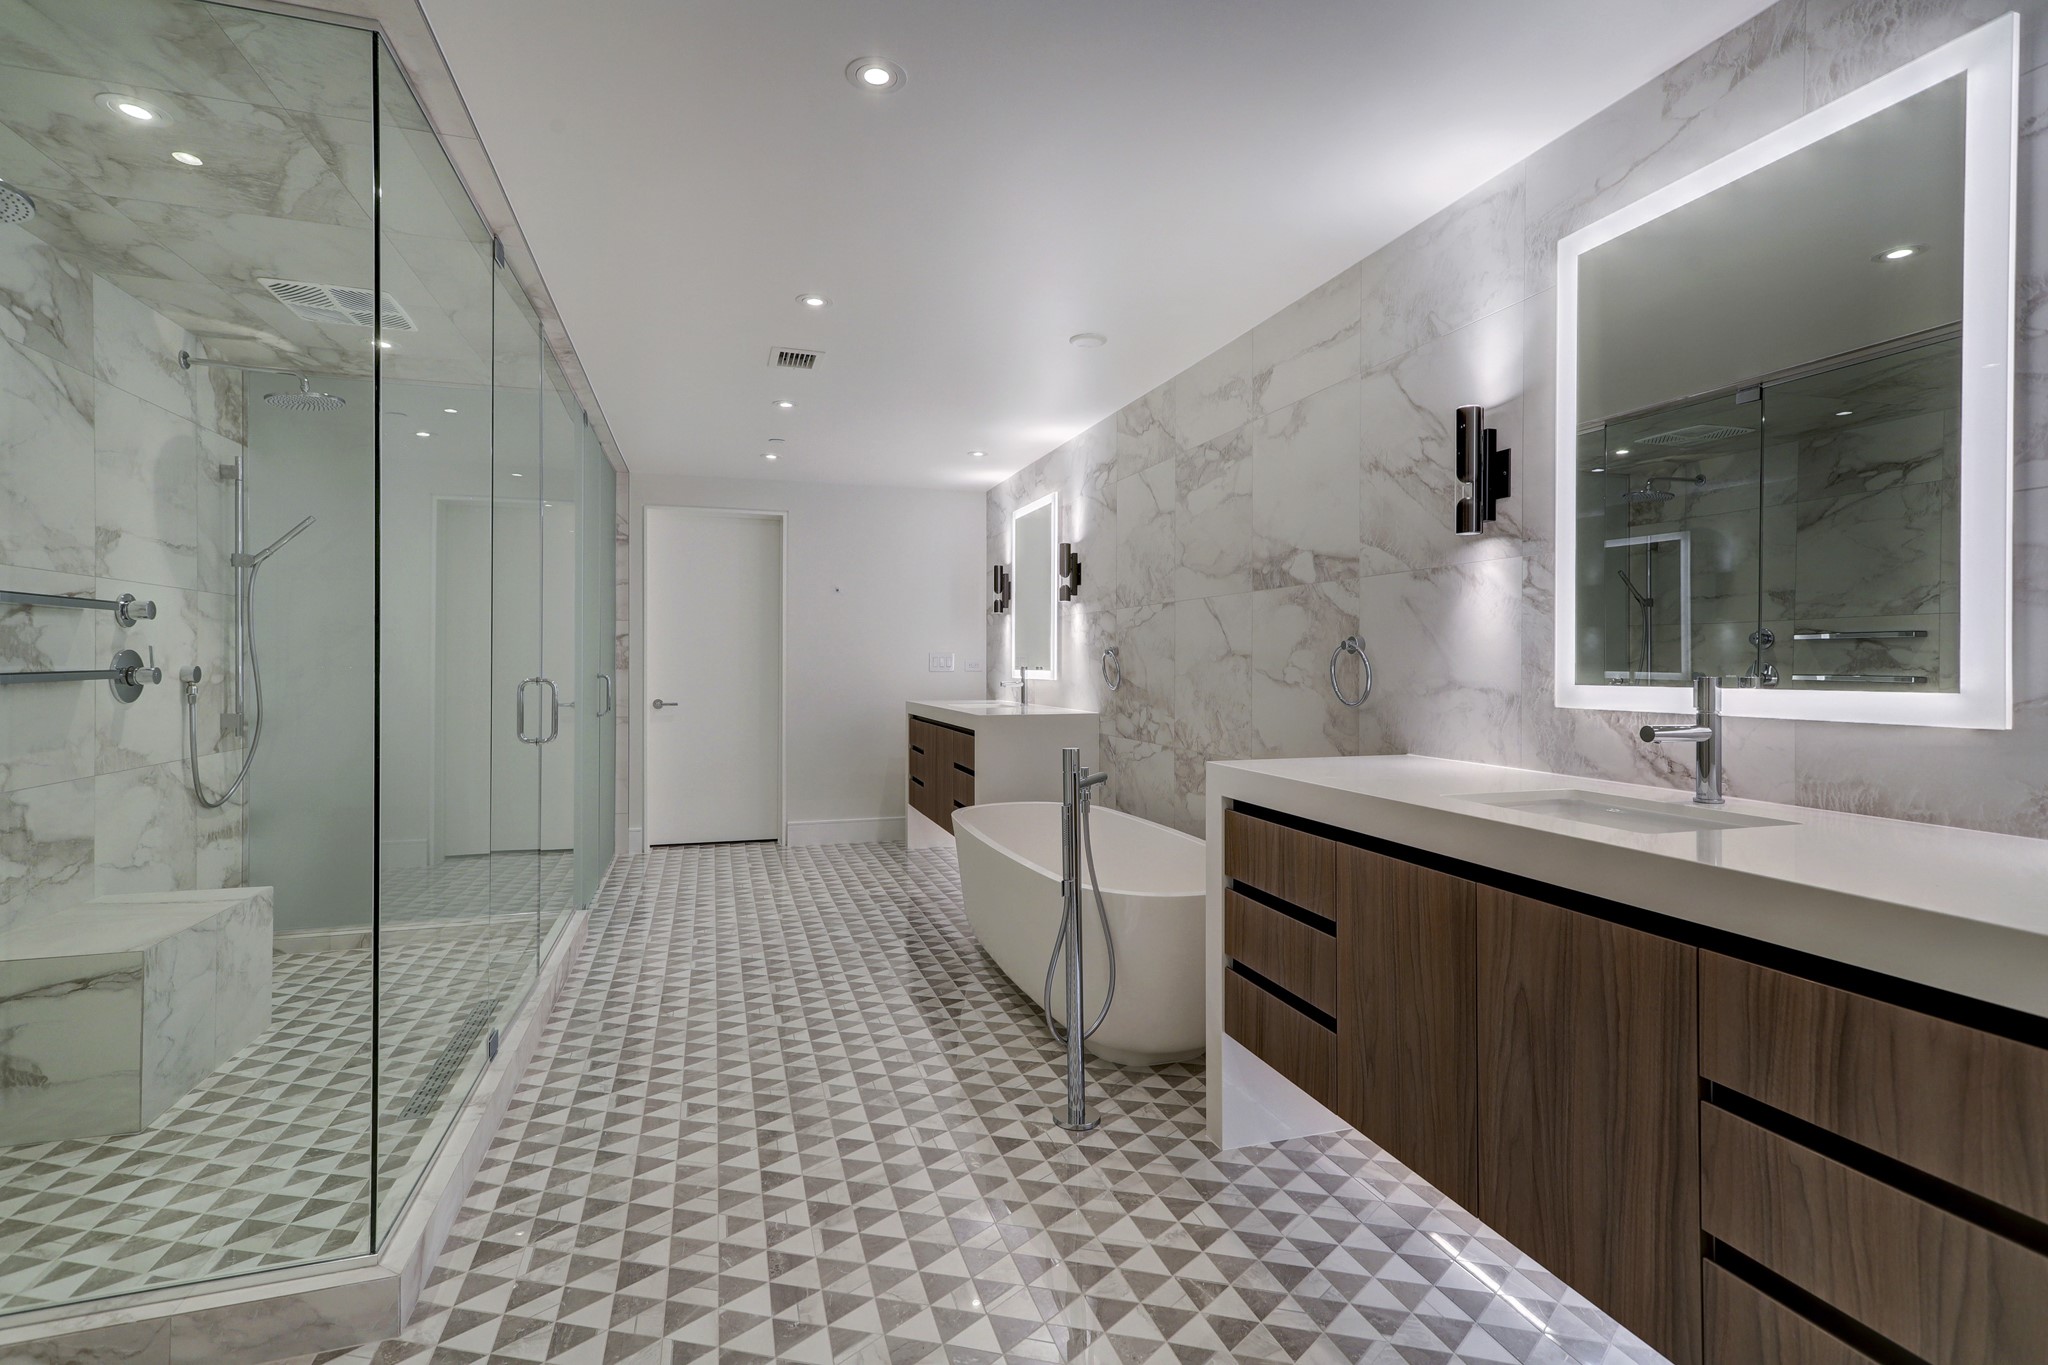 In the upper-level primary suite's spa bathroom, you'll find the same impressive fixtures and finish program as below, accentuated by lively Piemme tile.